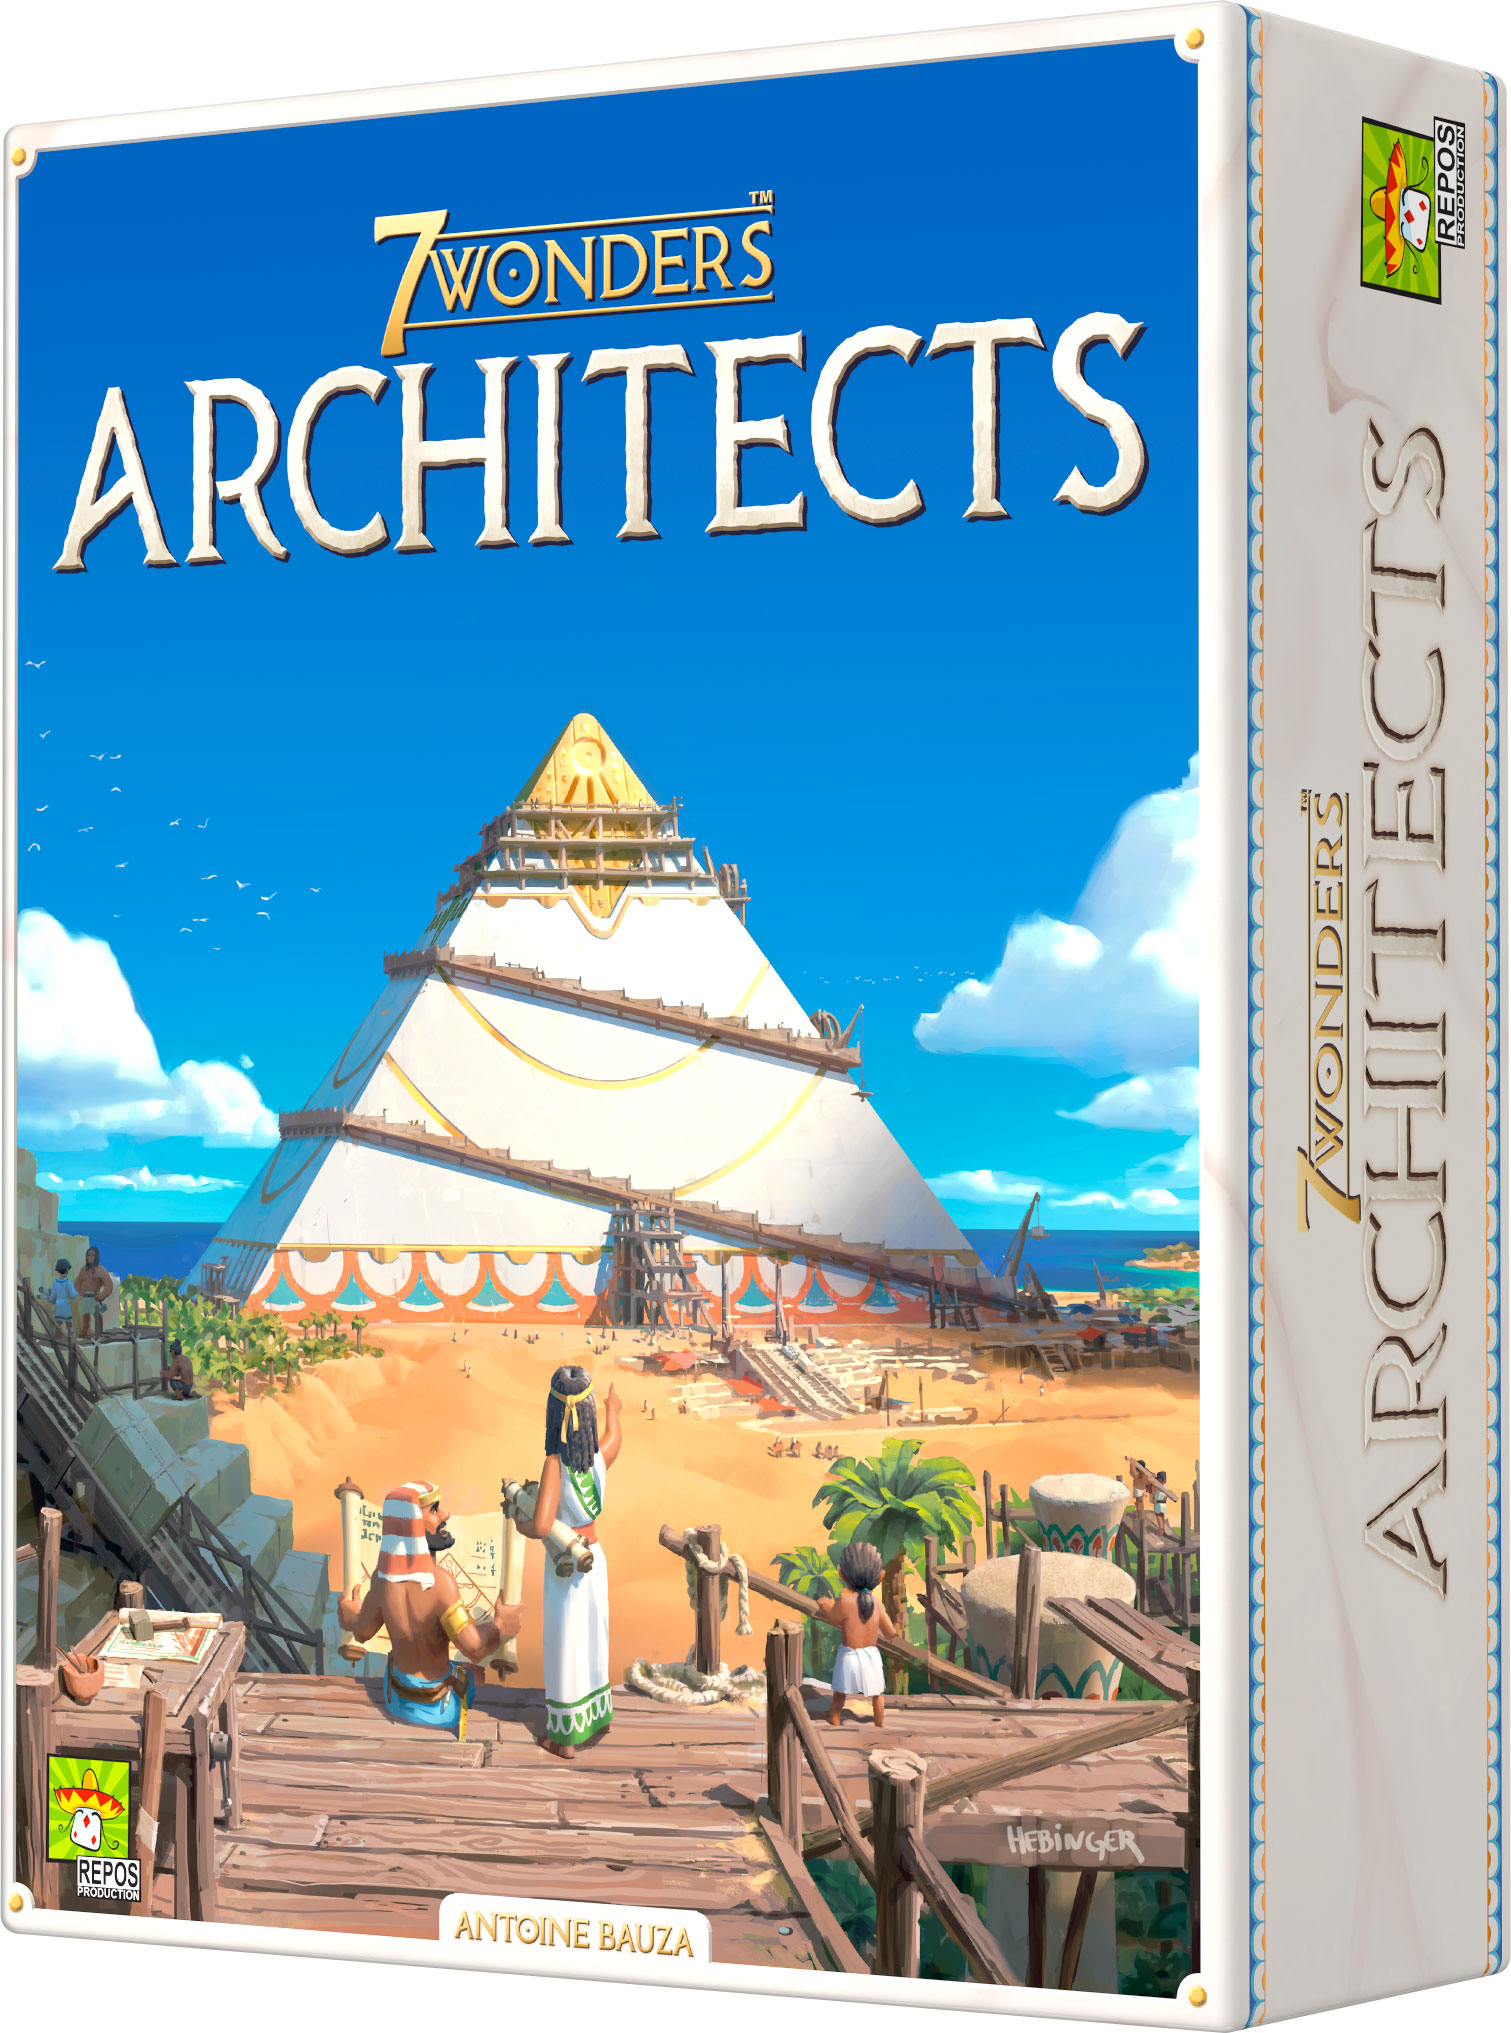 7 Wonders: Architects announced by Asmodee and Repos Productions